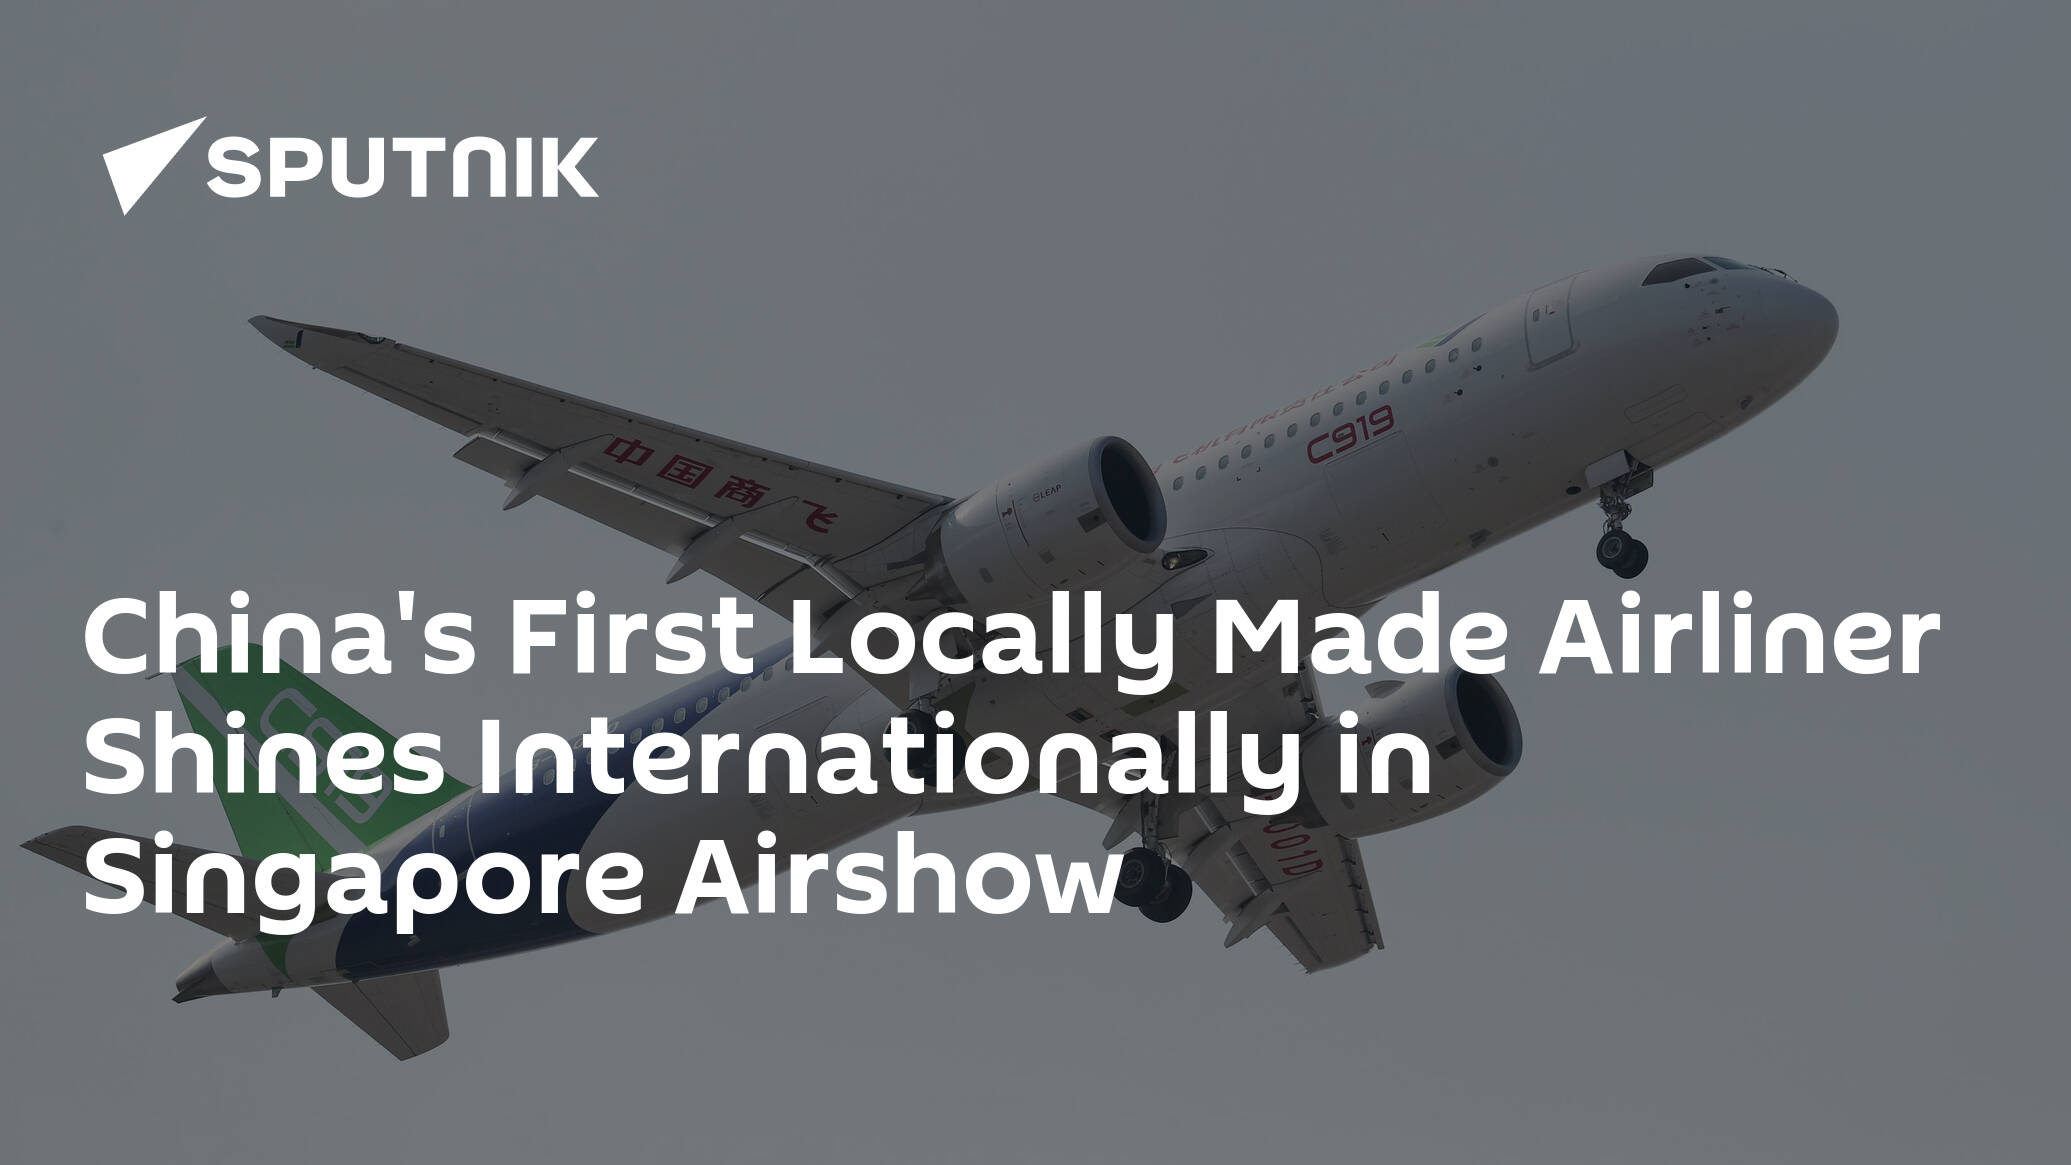 China's First Locally Made Airliner Shines Internationally in Singapore Airshow